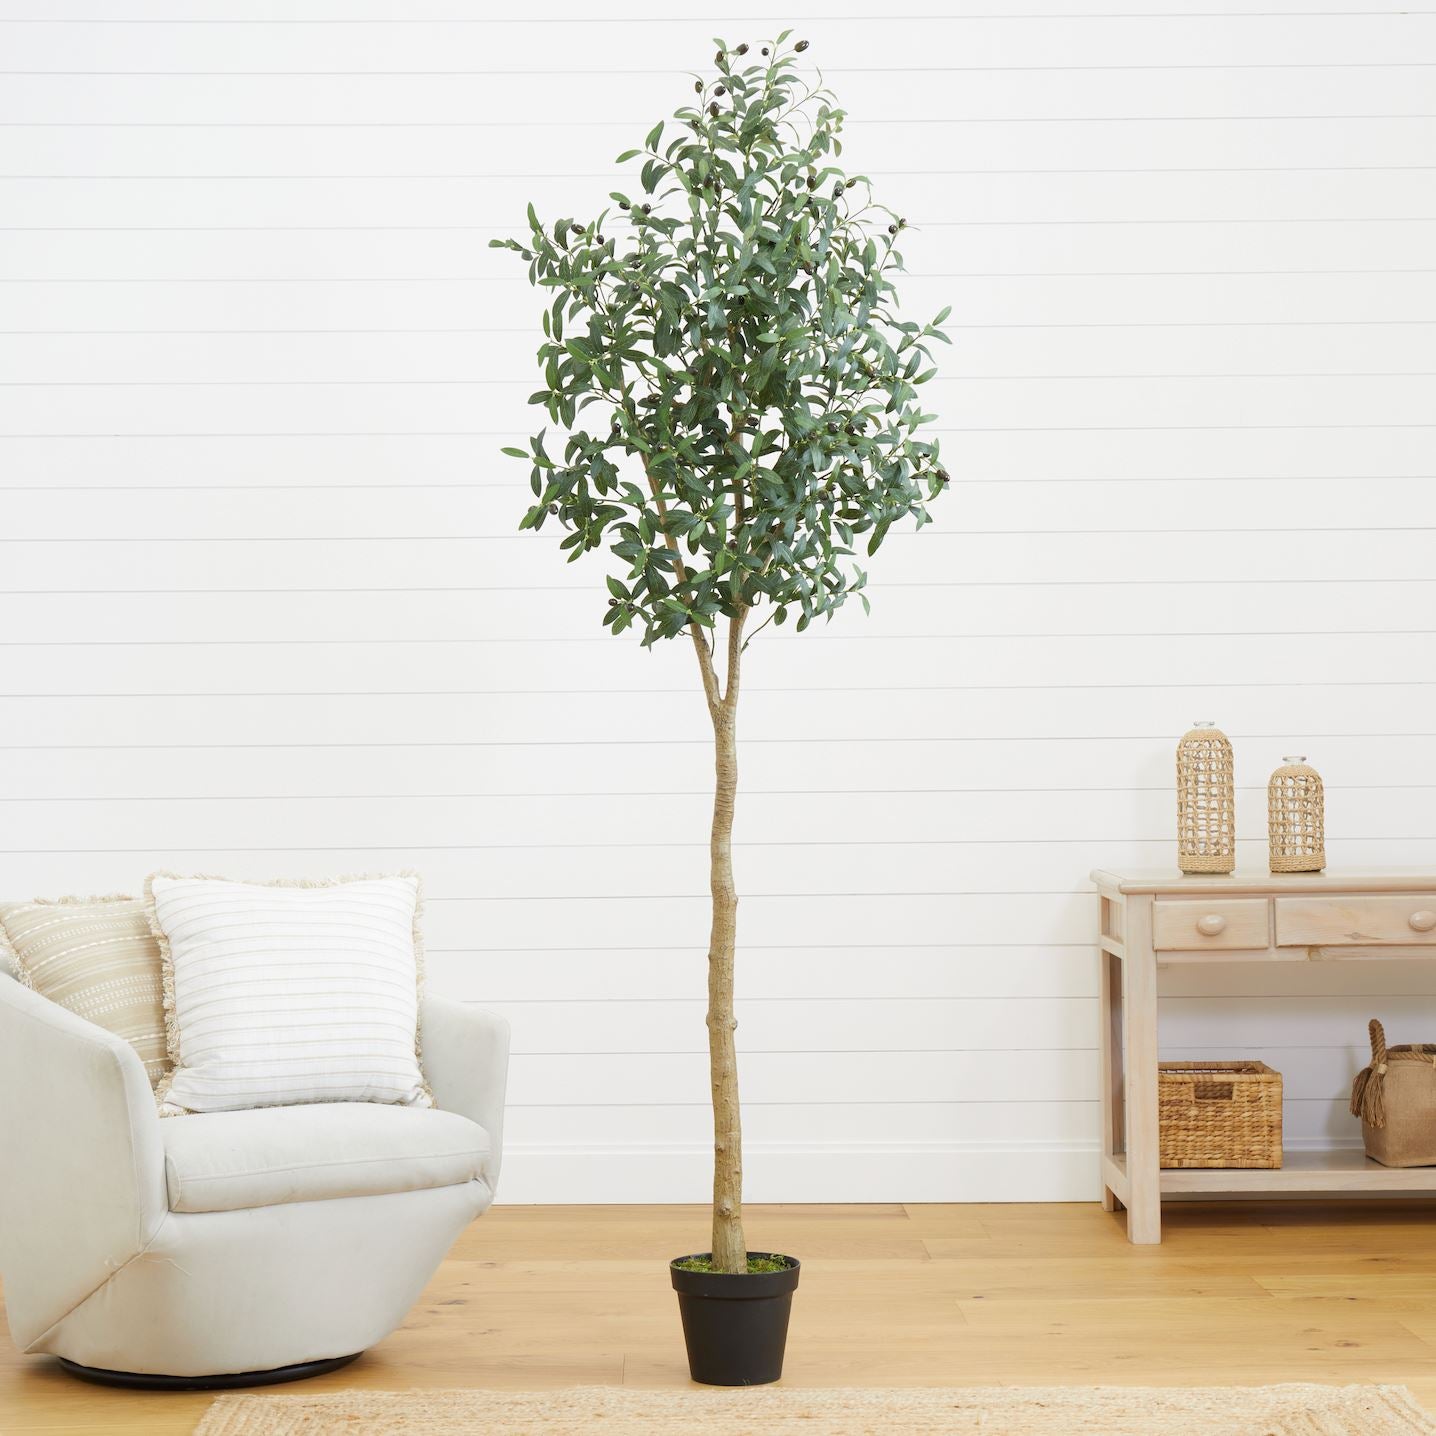 7’ Artificial Olive Tree